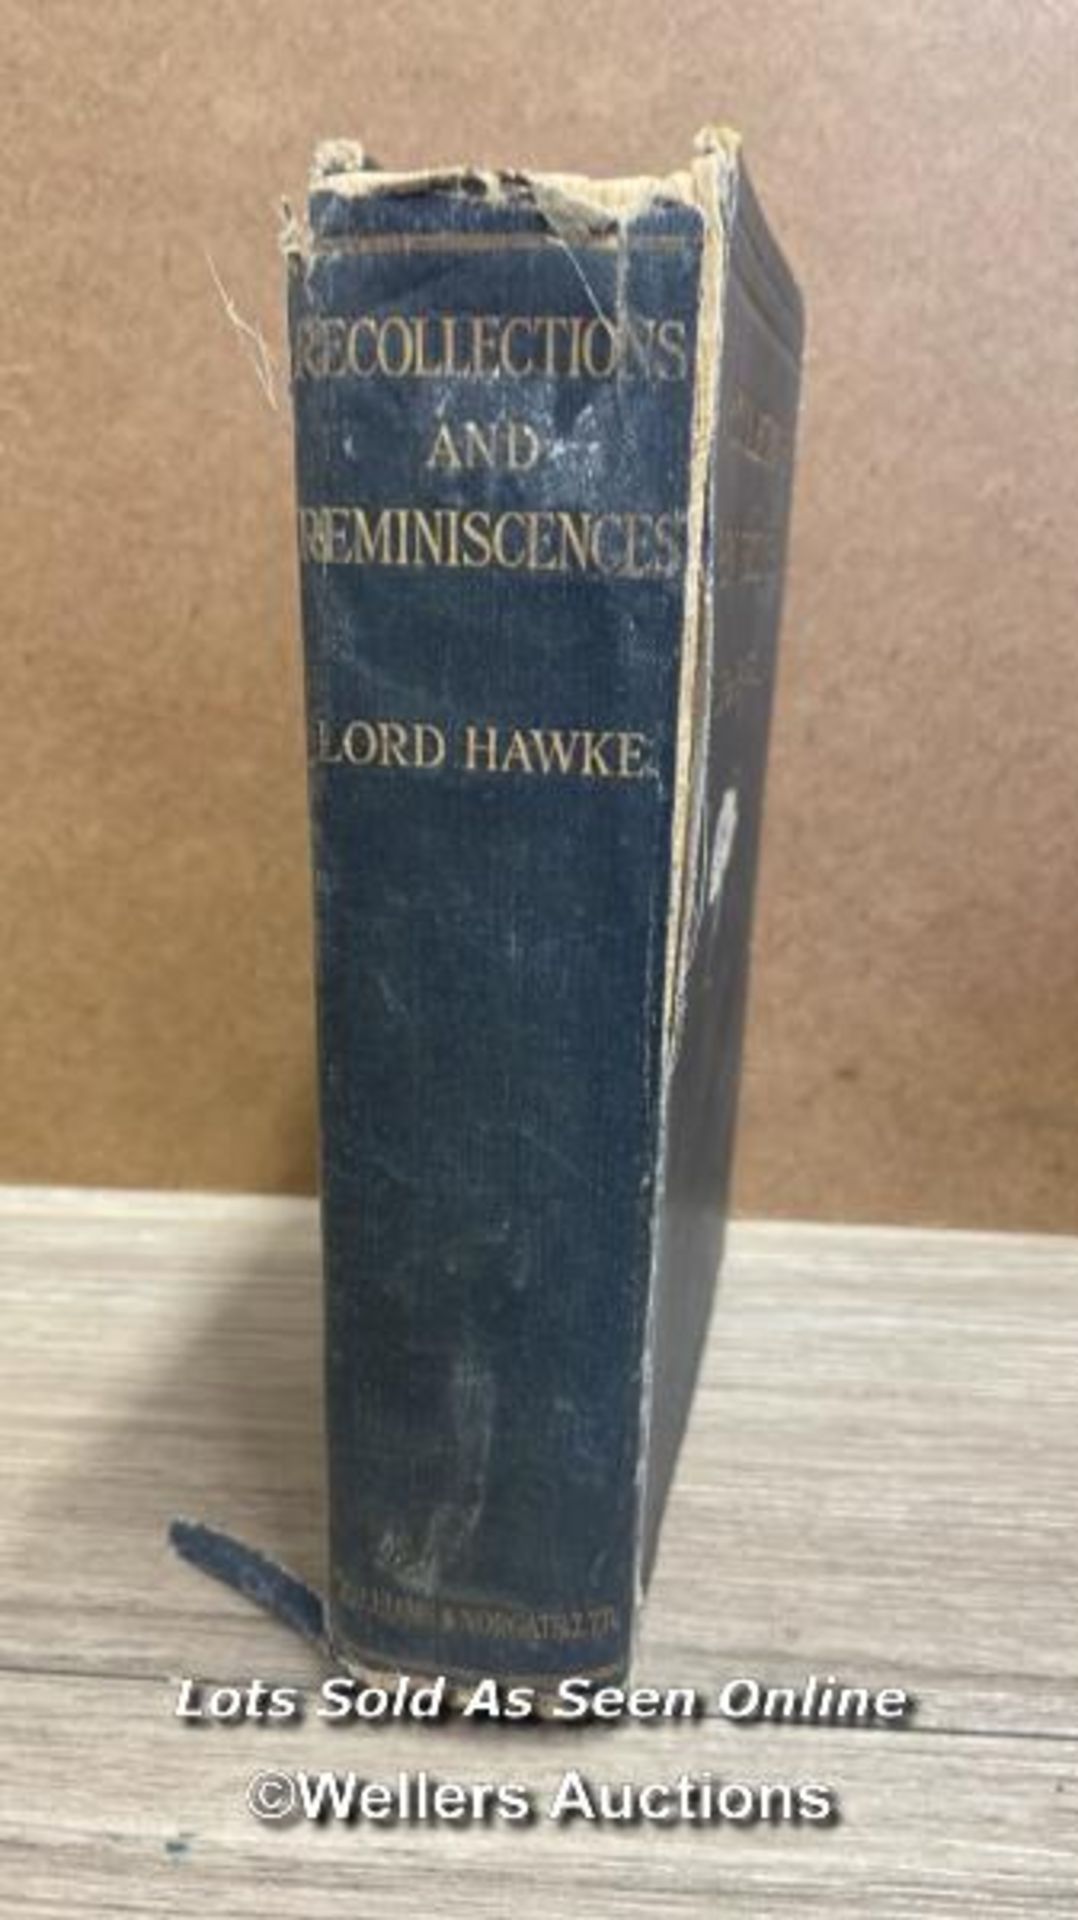 CRICKET - RECOLLECTIONS & REMINISCENCES BY LORD HAWKE SECOND IMPRESSION 1924 - Image 2 of 5